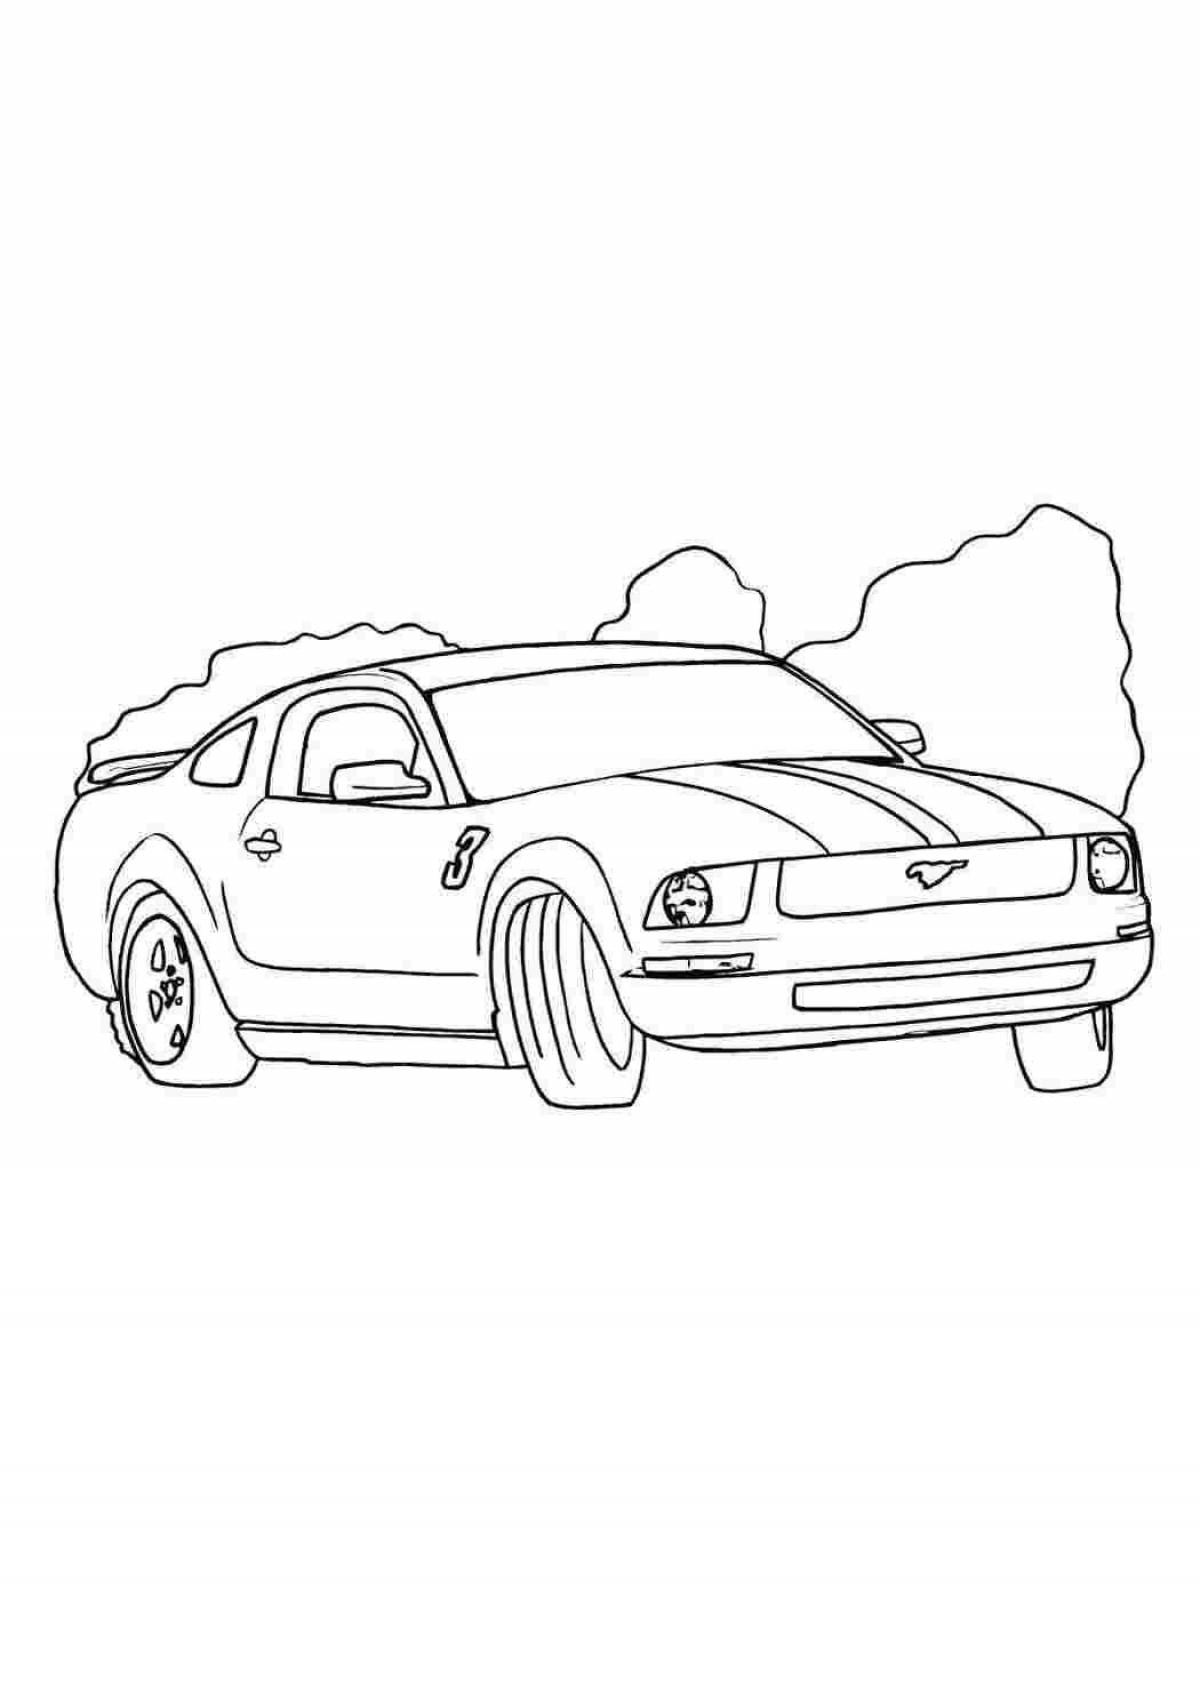 Brilliant ford mustang coloring page for kids